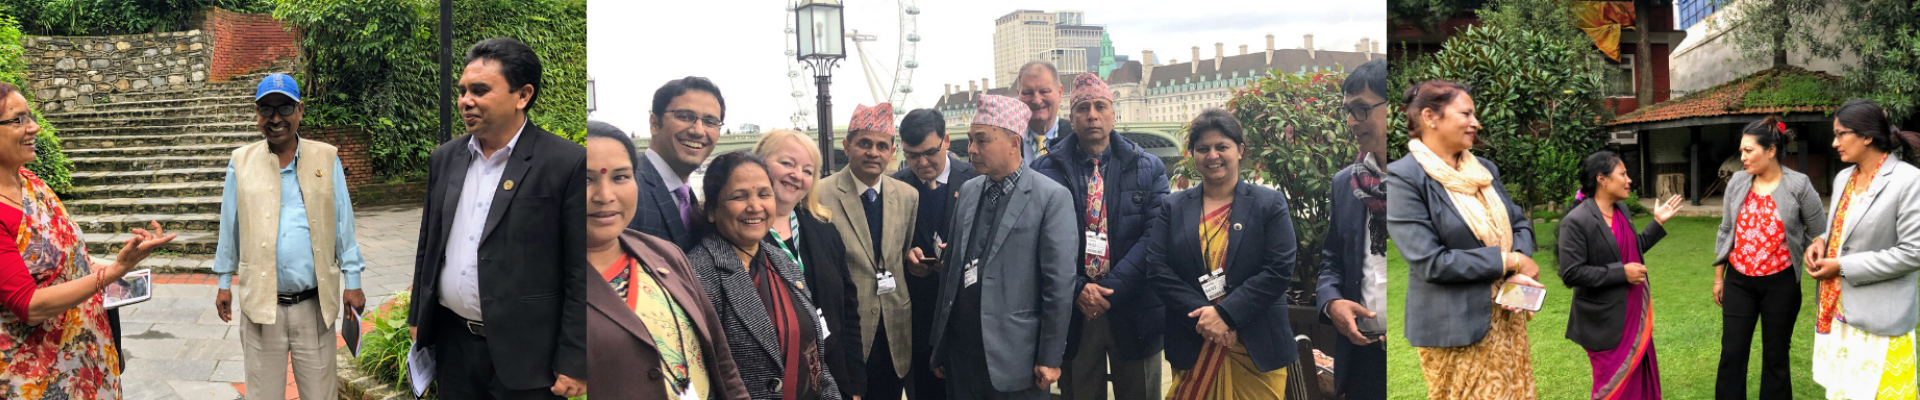 participants in WFD's Nepal programme in Nepal and the UK